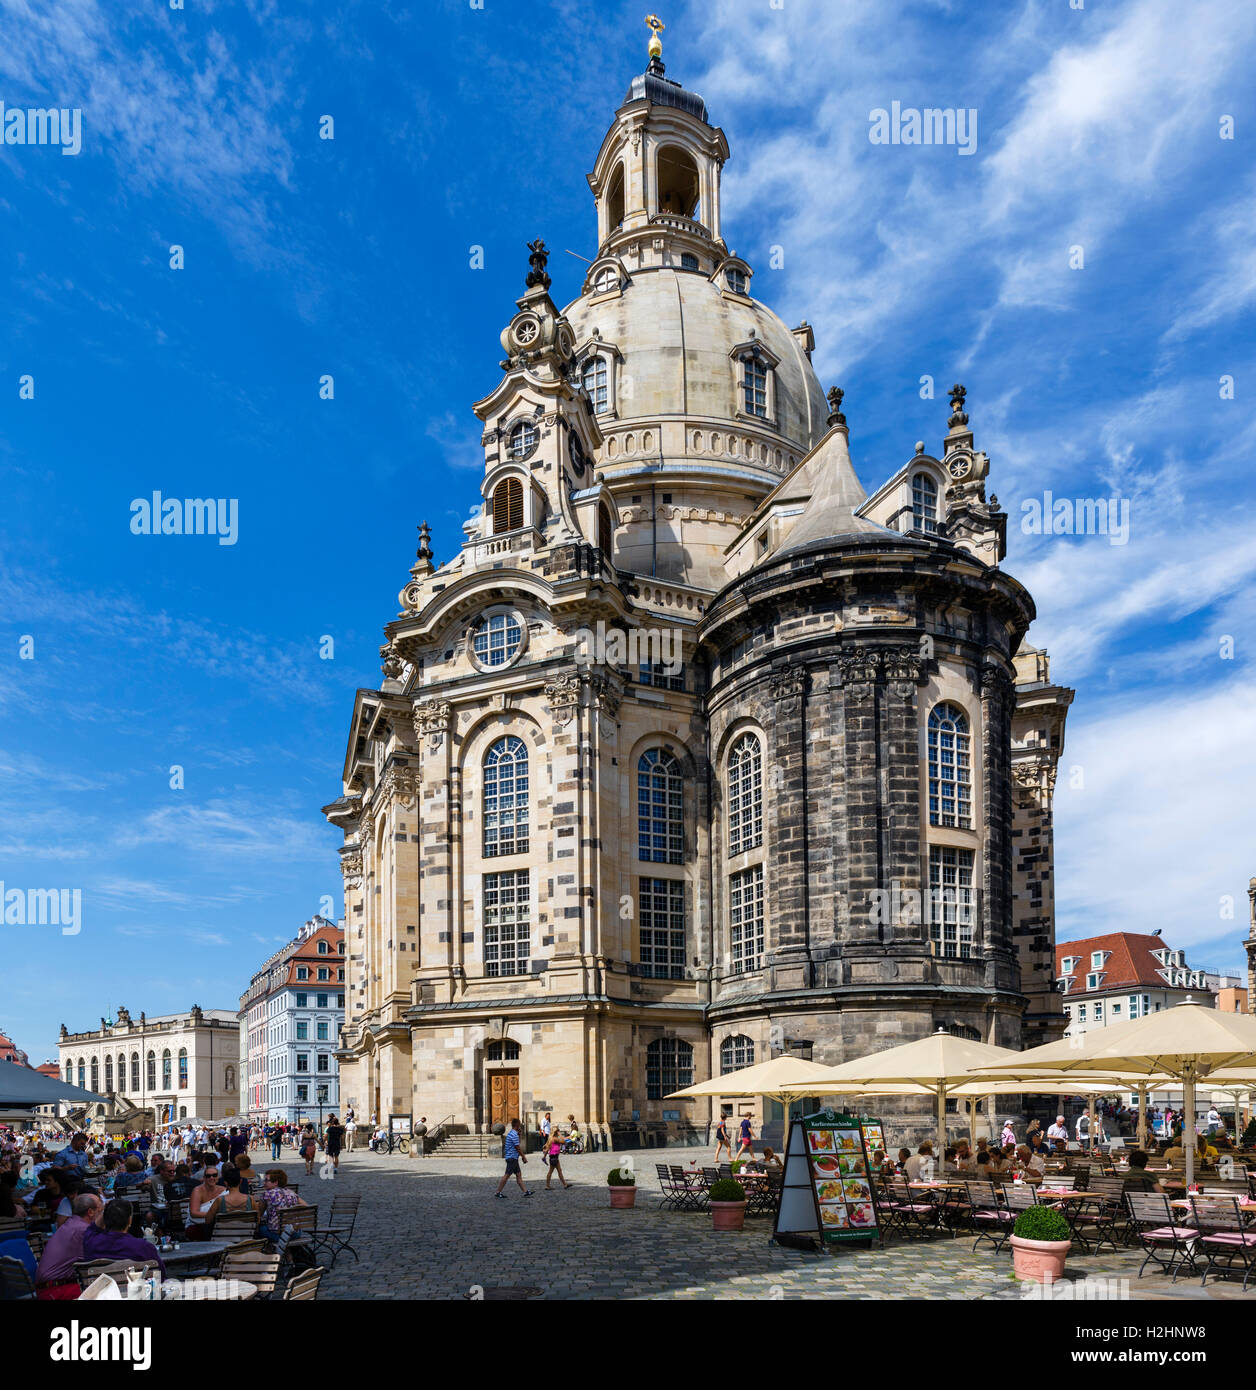 Cafes in front of the Frauenkirche, viewed from Salzgasse, Dresden, Saxony, Germany Stock Photo